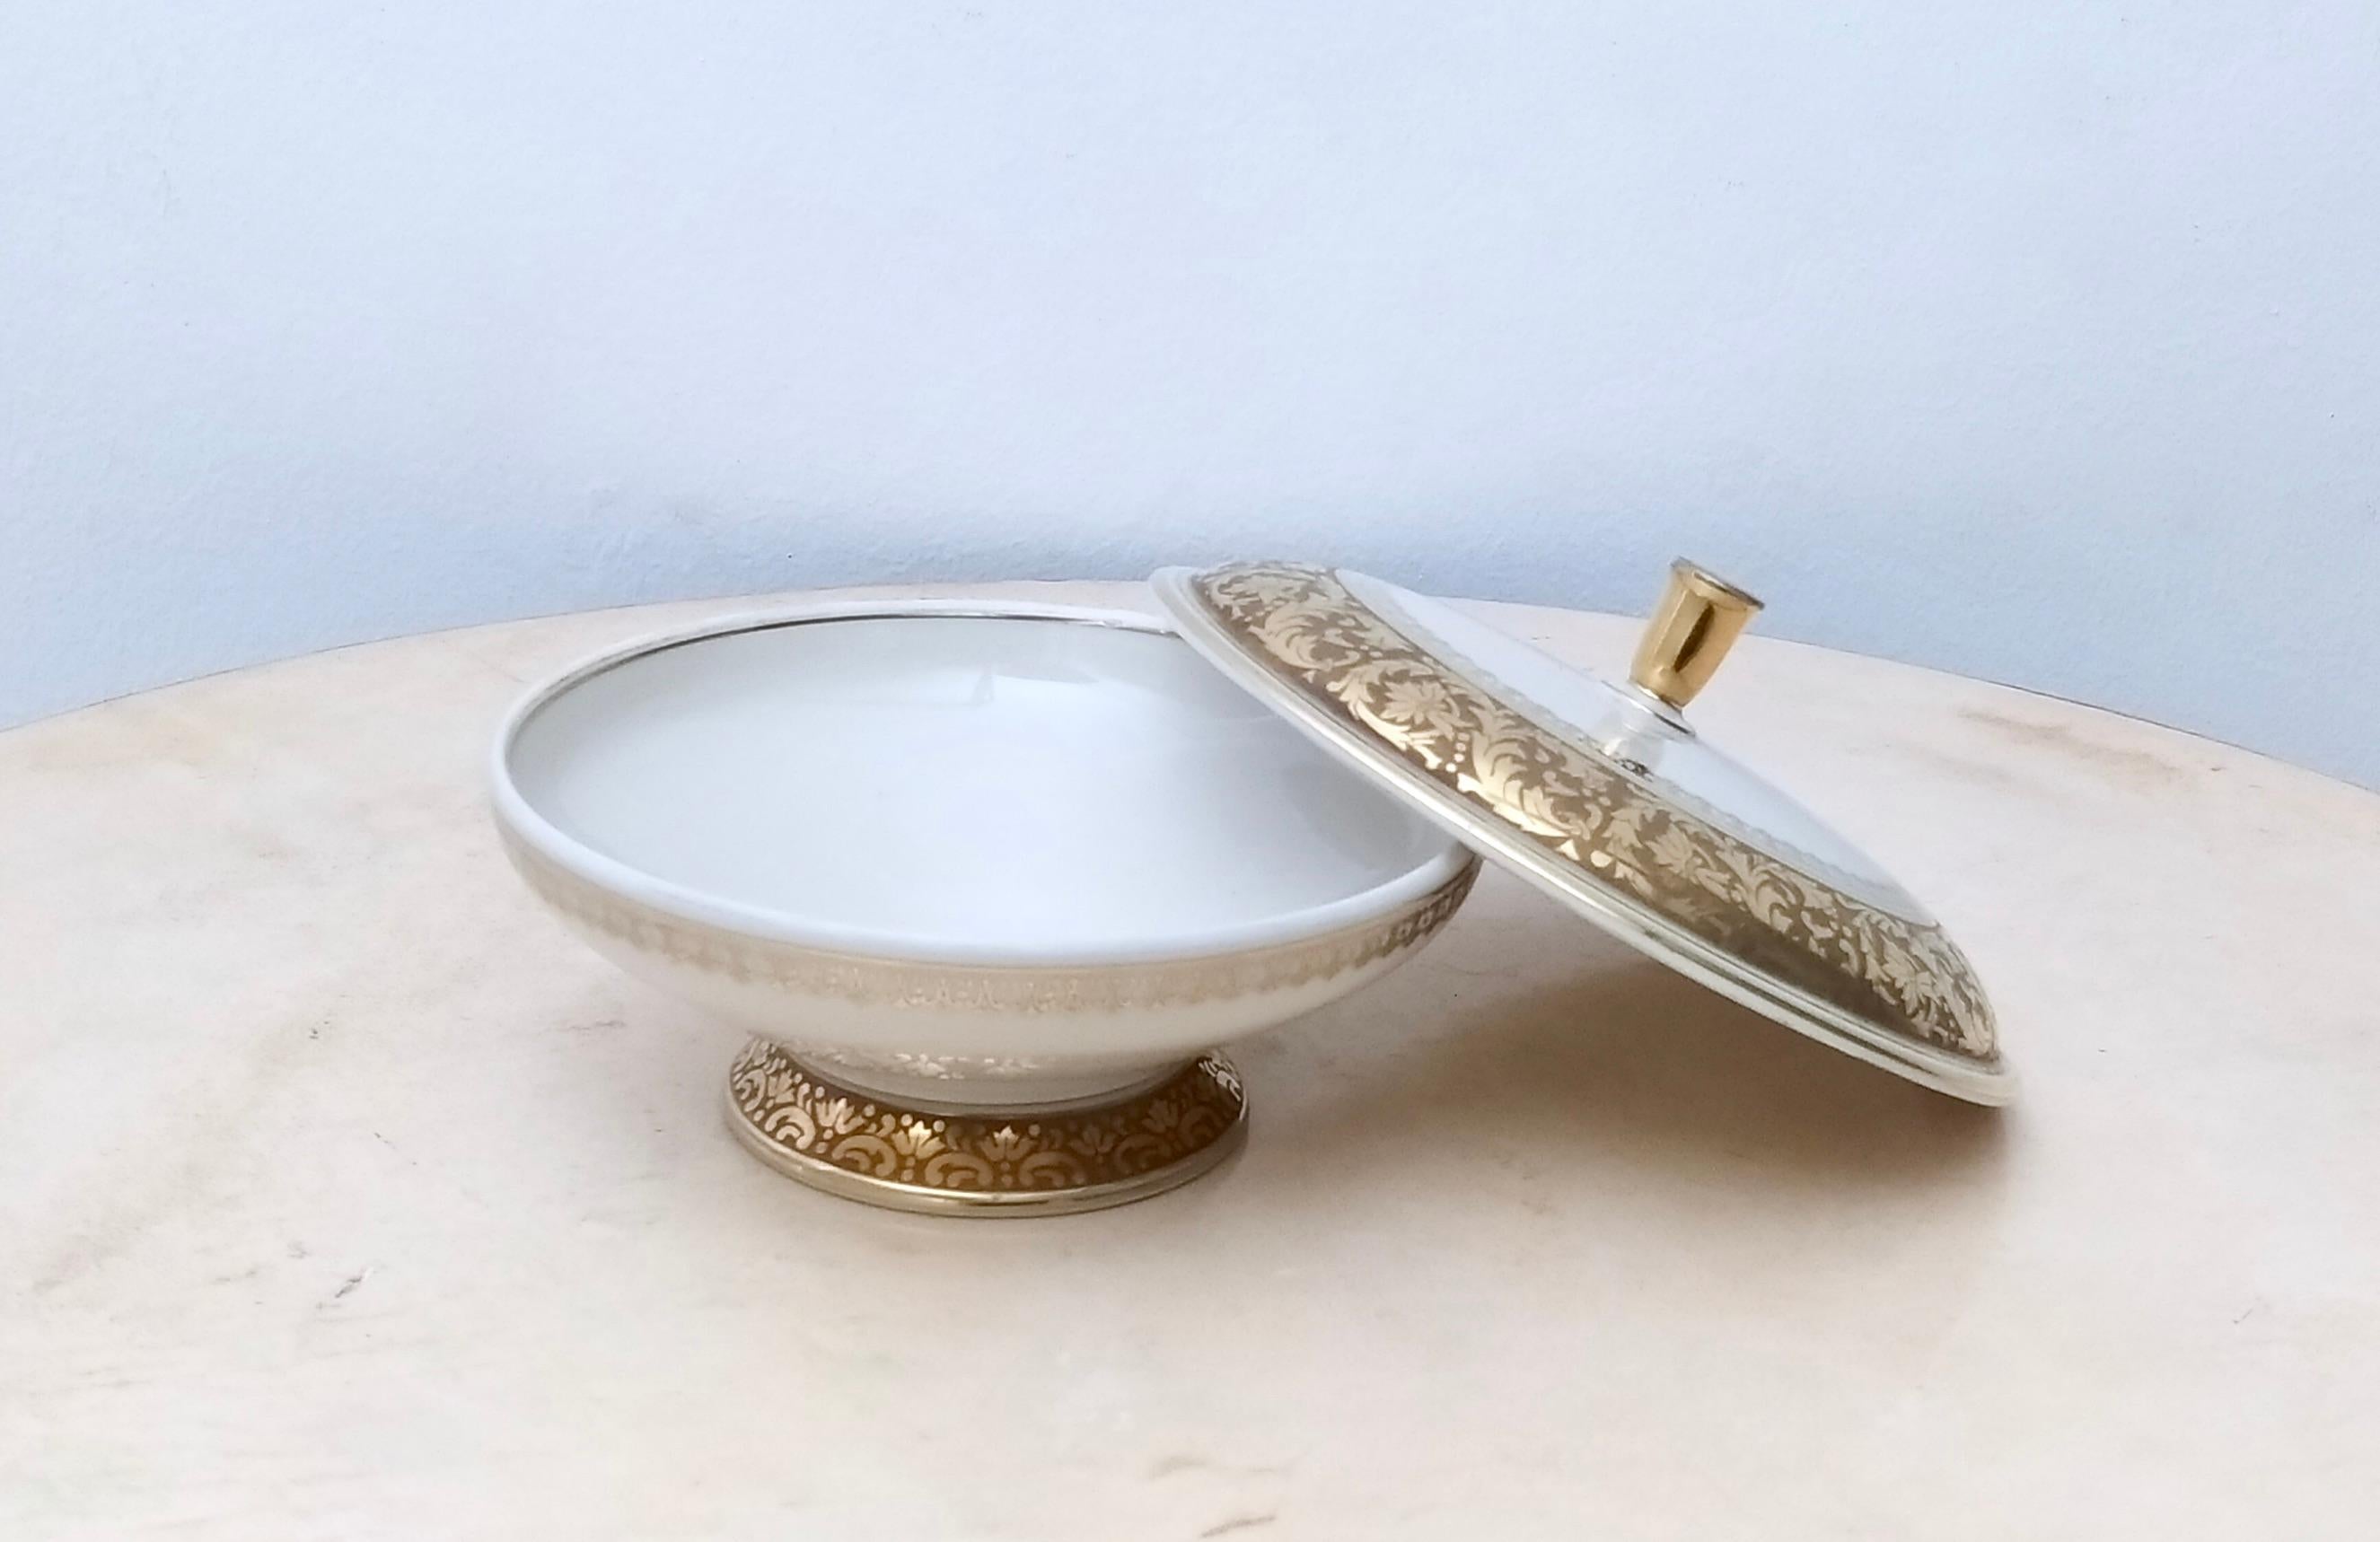 Vintage White Porcelain Trinket Bowl with Gold Details by Rosenthal In Excellent Condition For Sale In Bresso, Lombardy